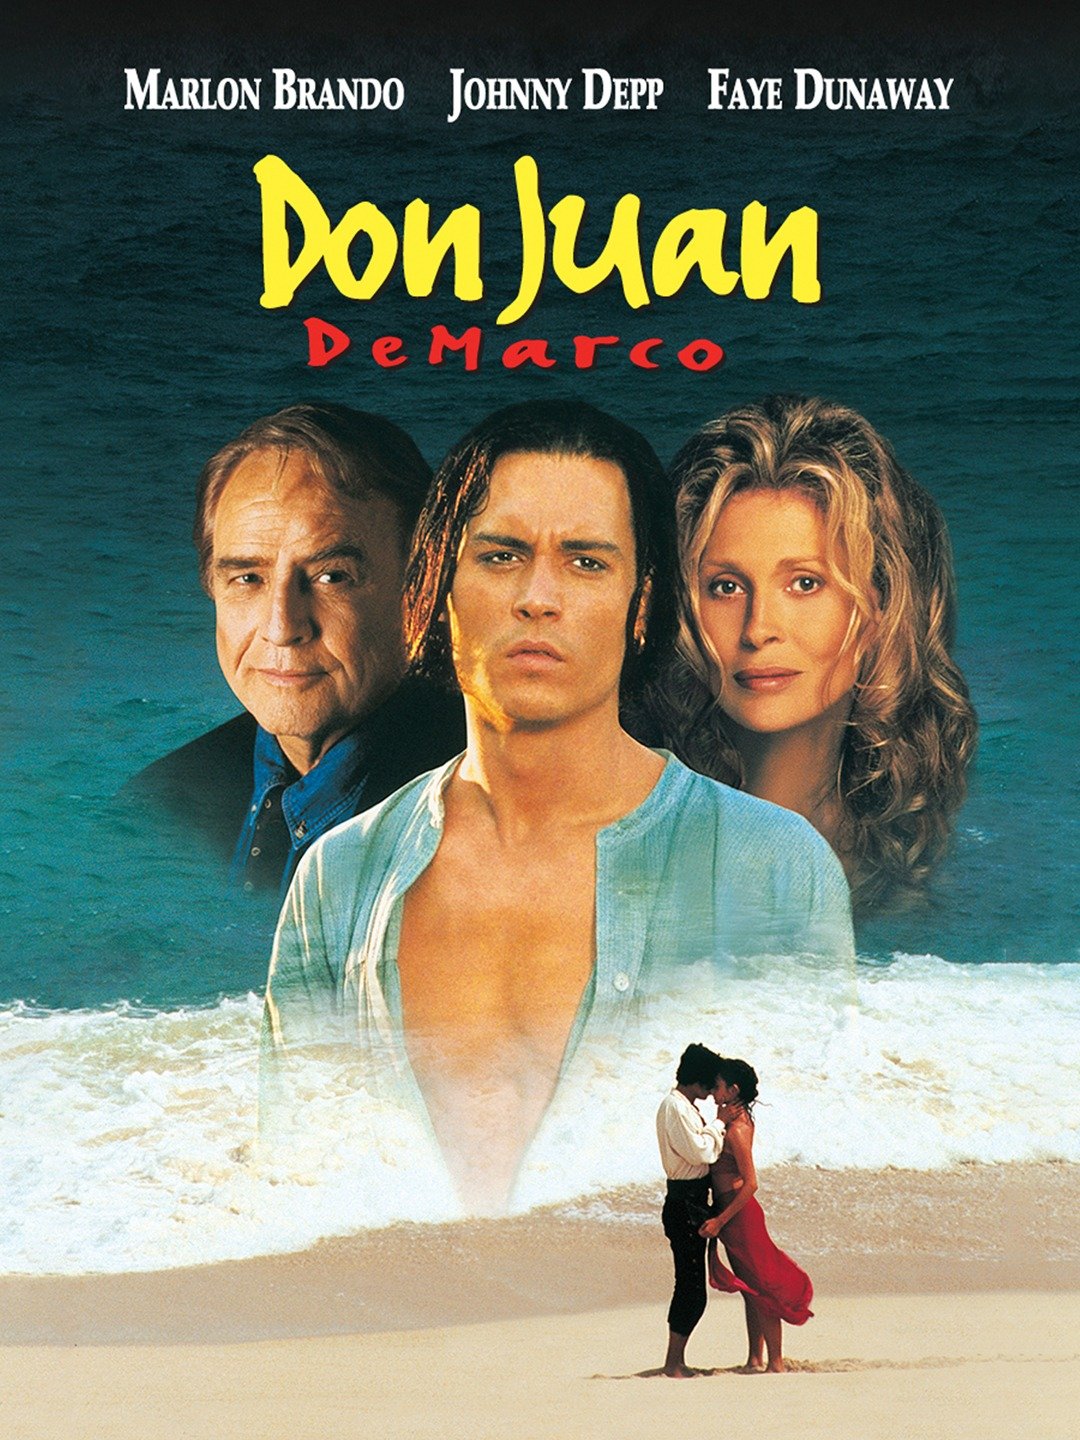 Movie poster for "Don Juan DeMarco." (New Line Cinema)